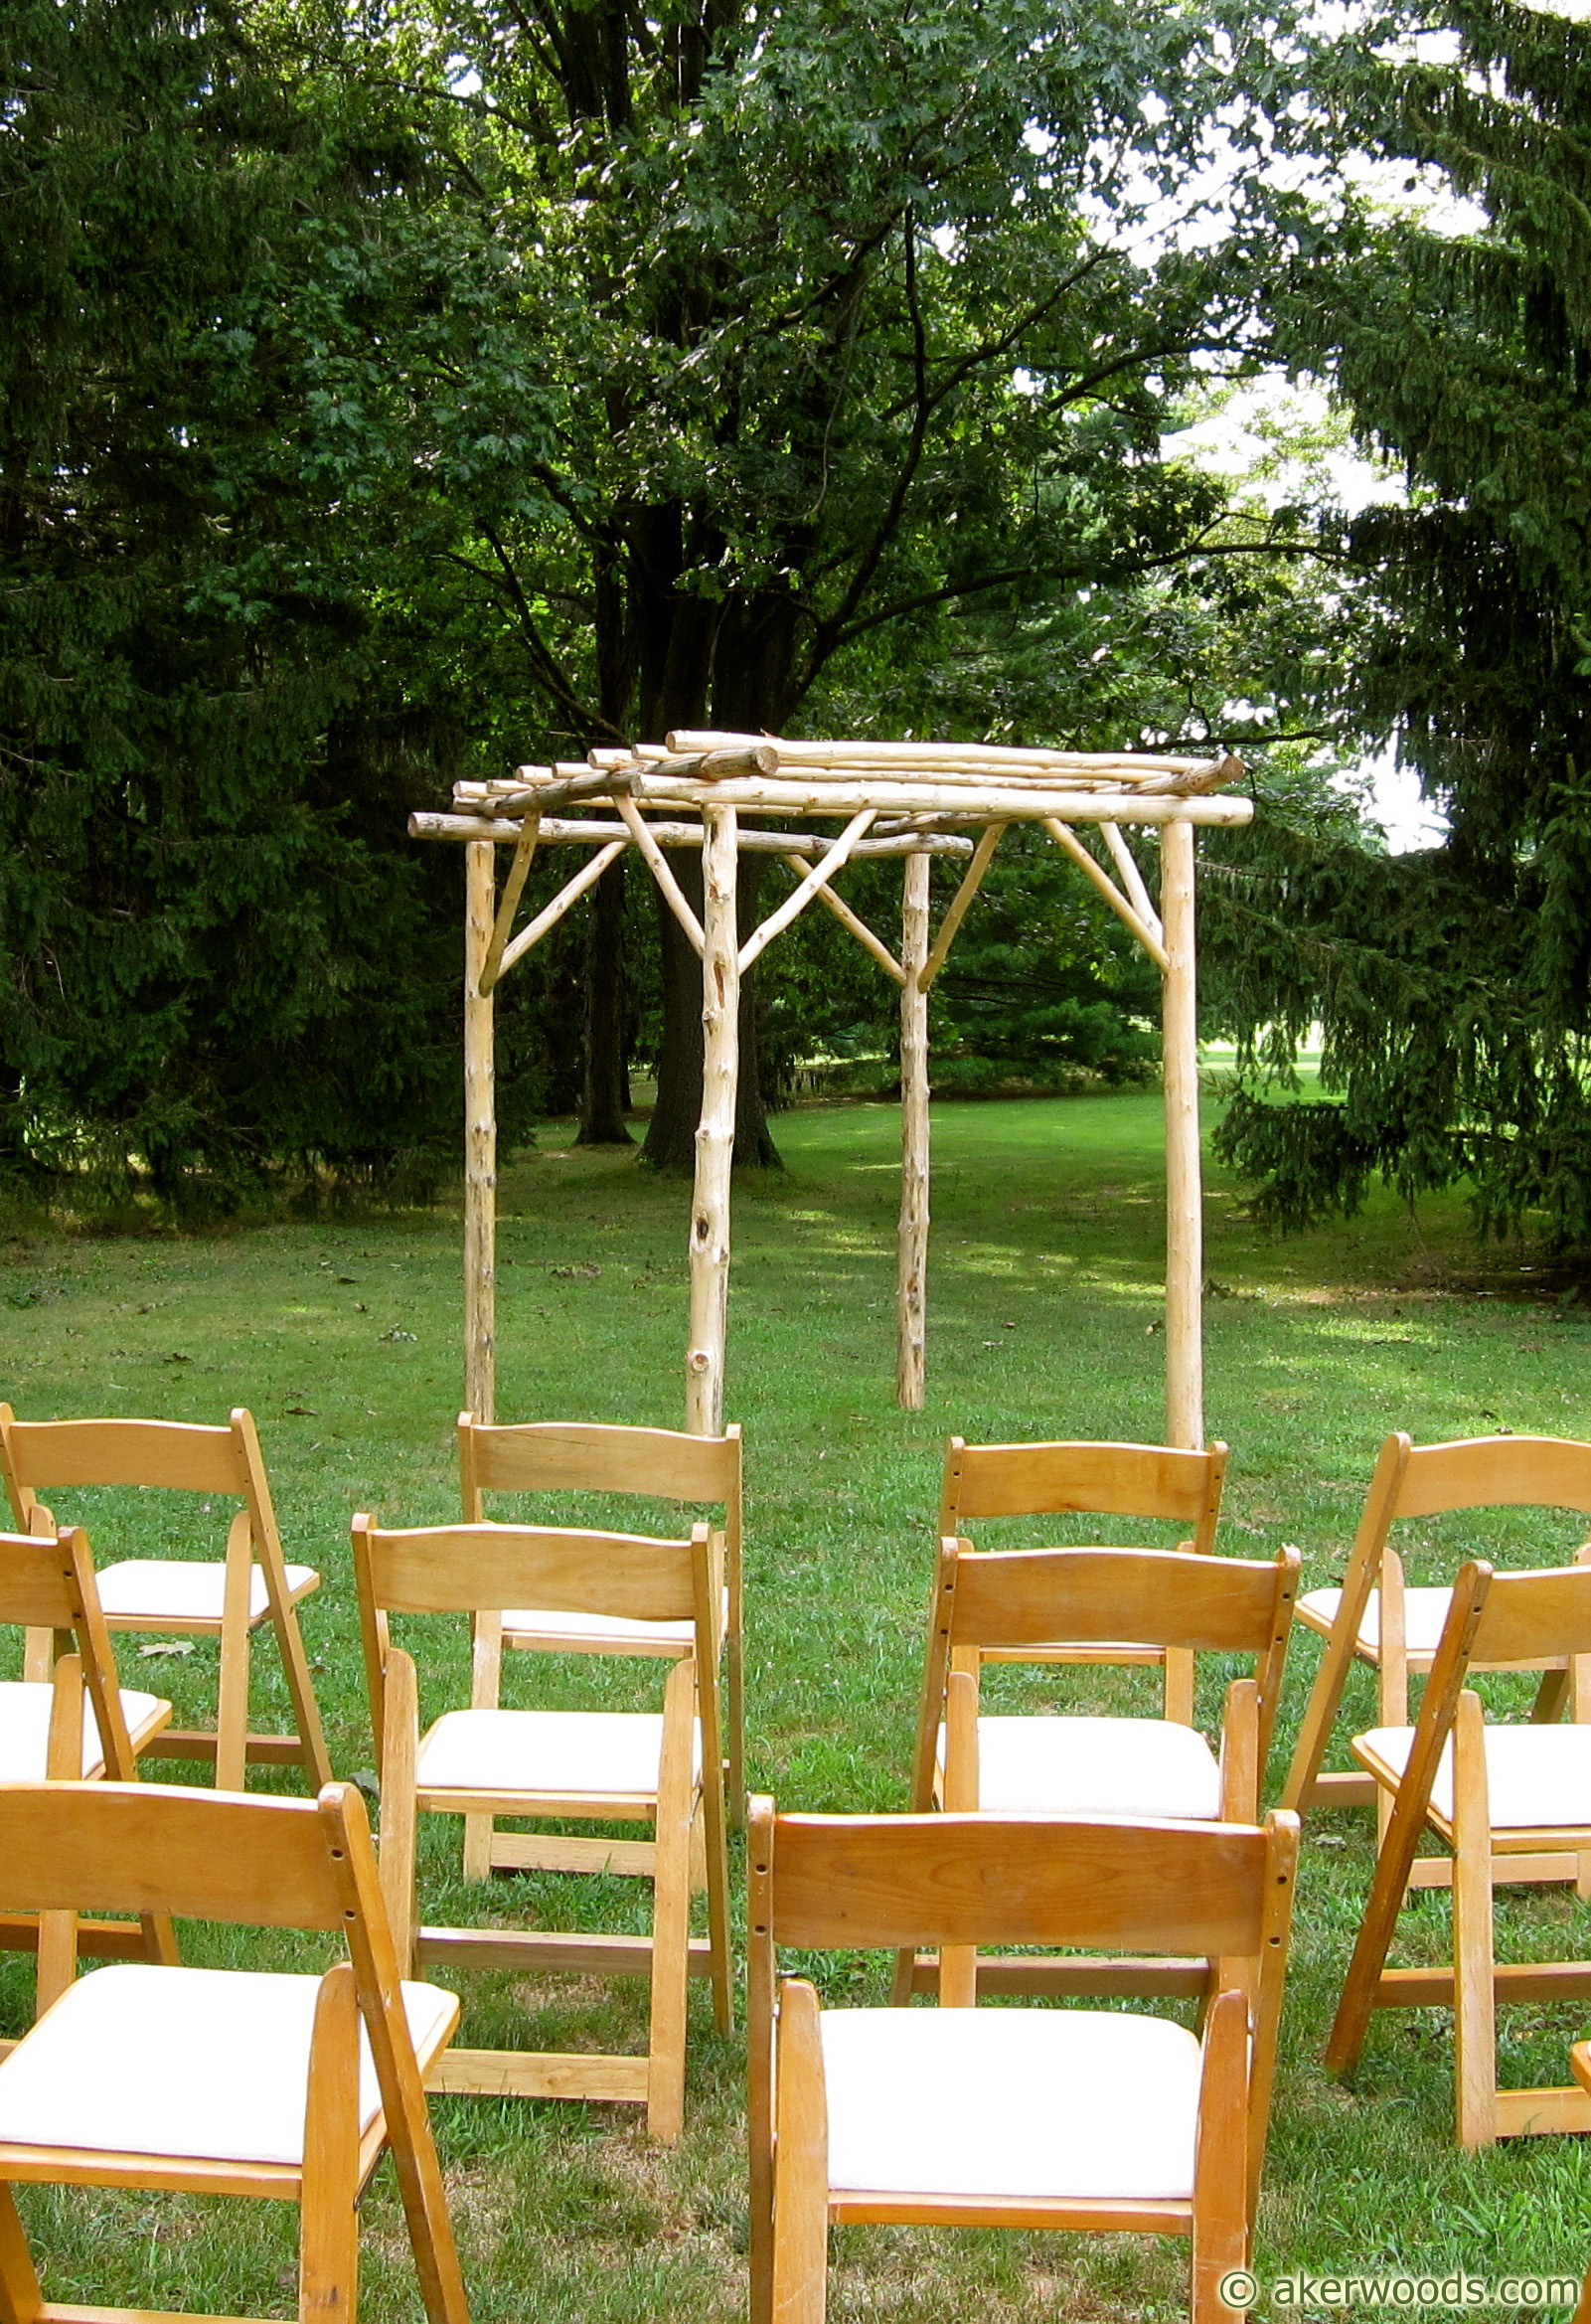 Aker Woods Company: Picture of an Arbour with AkerWoods Posts from Customer: Jim Brubaker